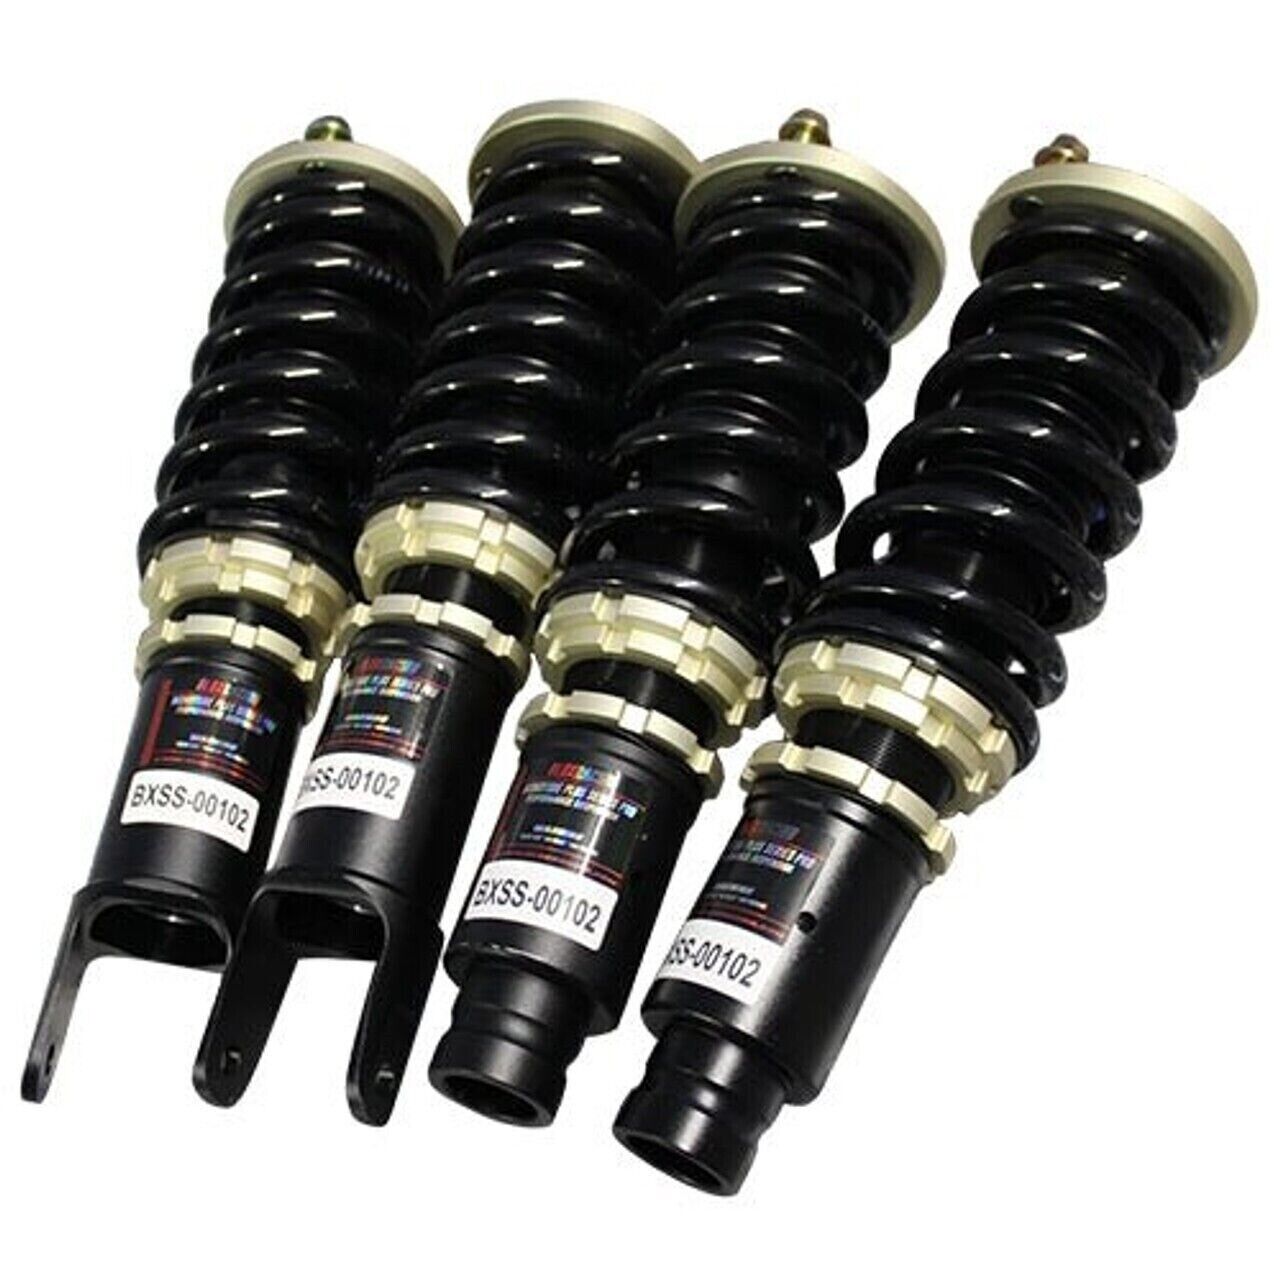 BLOX Racing BXSS-00102 for 92-01 Drag Pro Series Coilover Honda Civic Acura